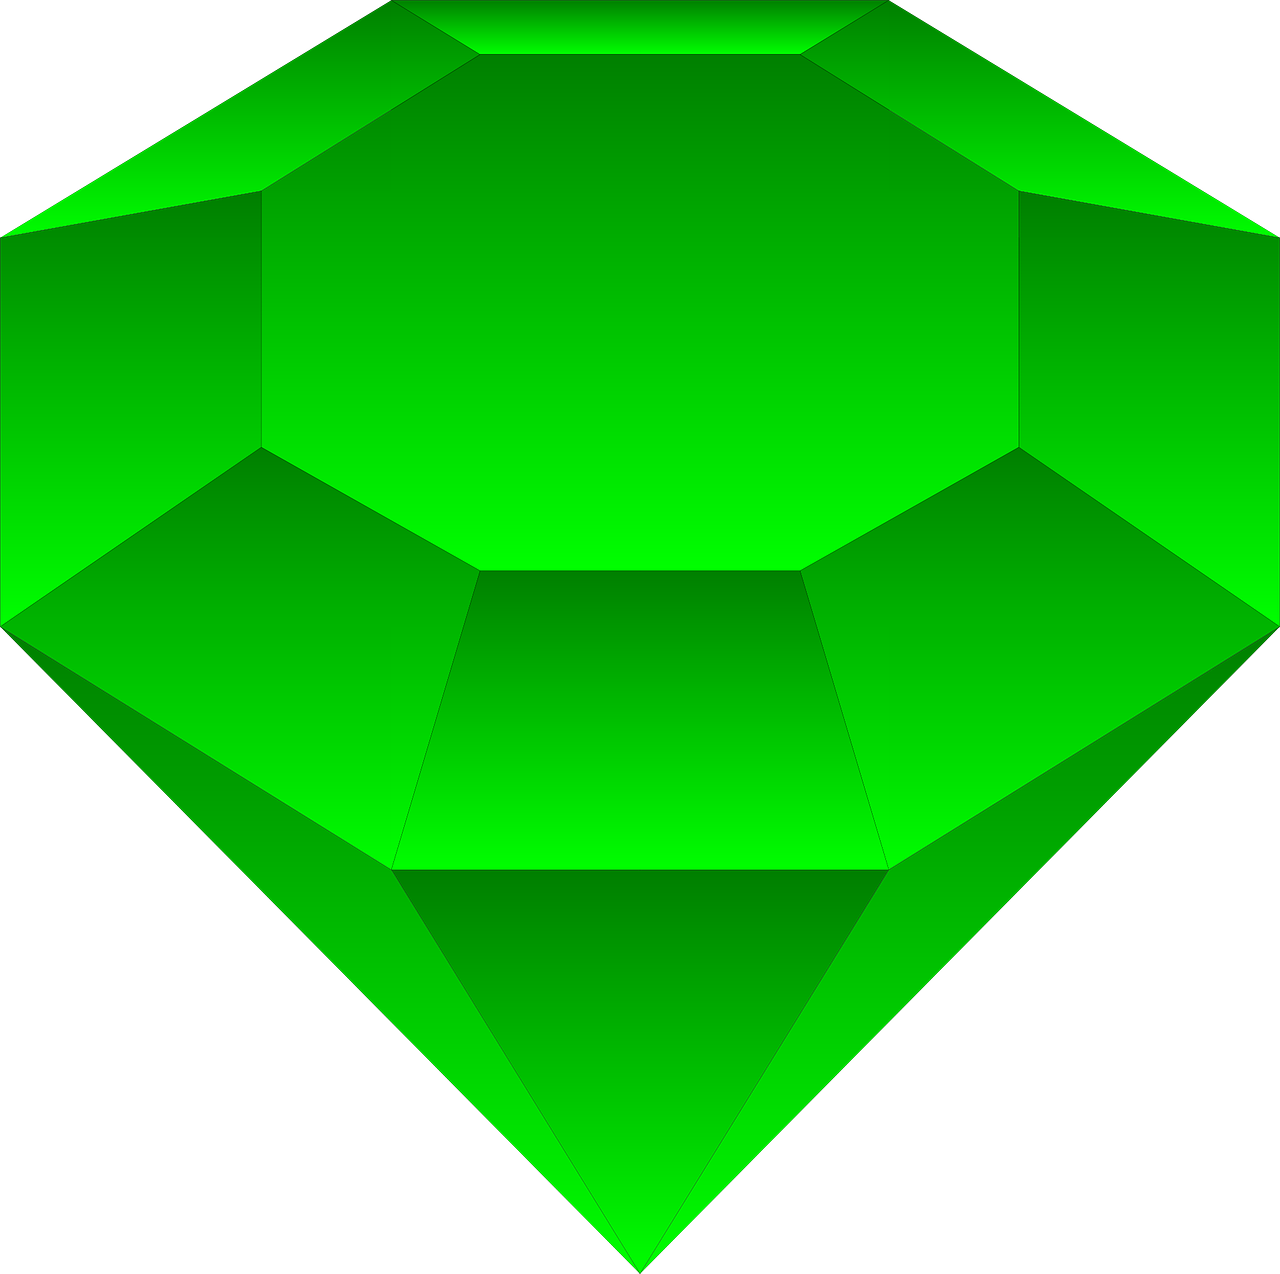 a green diamond on a black background, a raytraced image, deviantart, made in paint tool sai2, treasure background, it\'s name is greeny, blocky shape